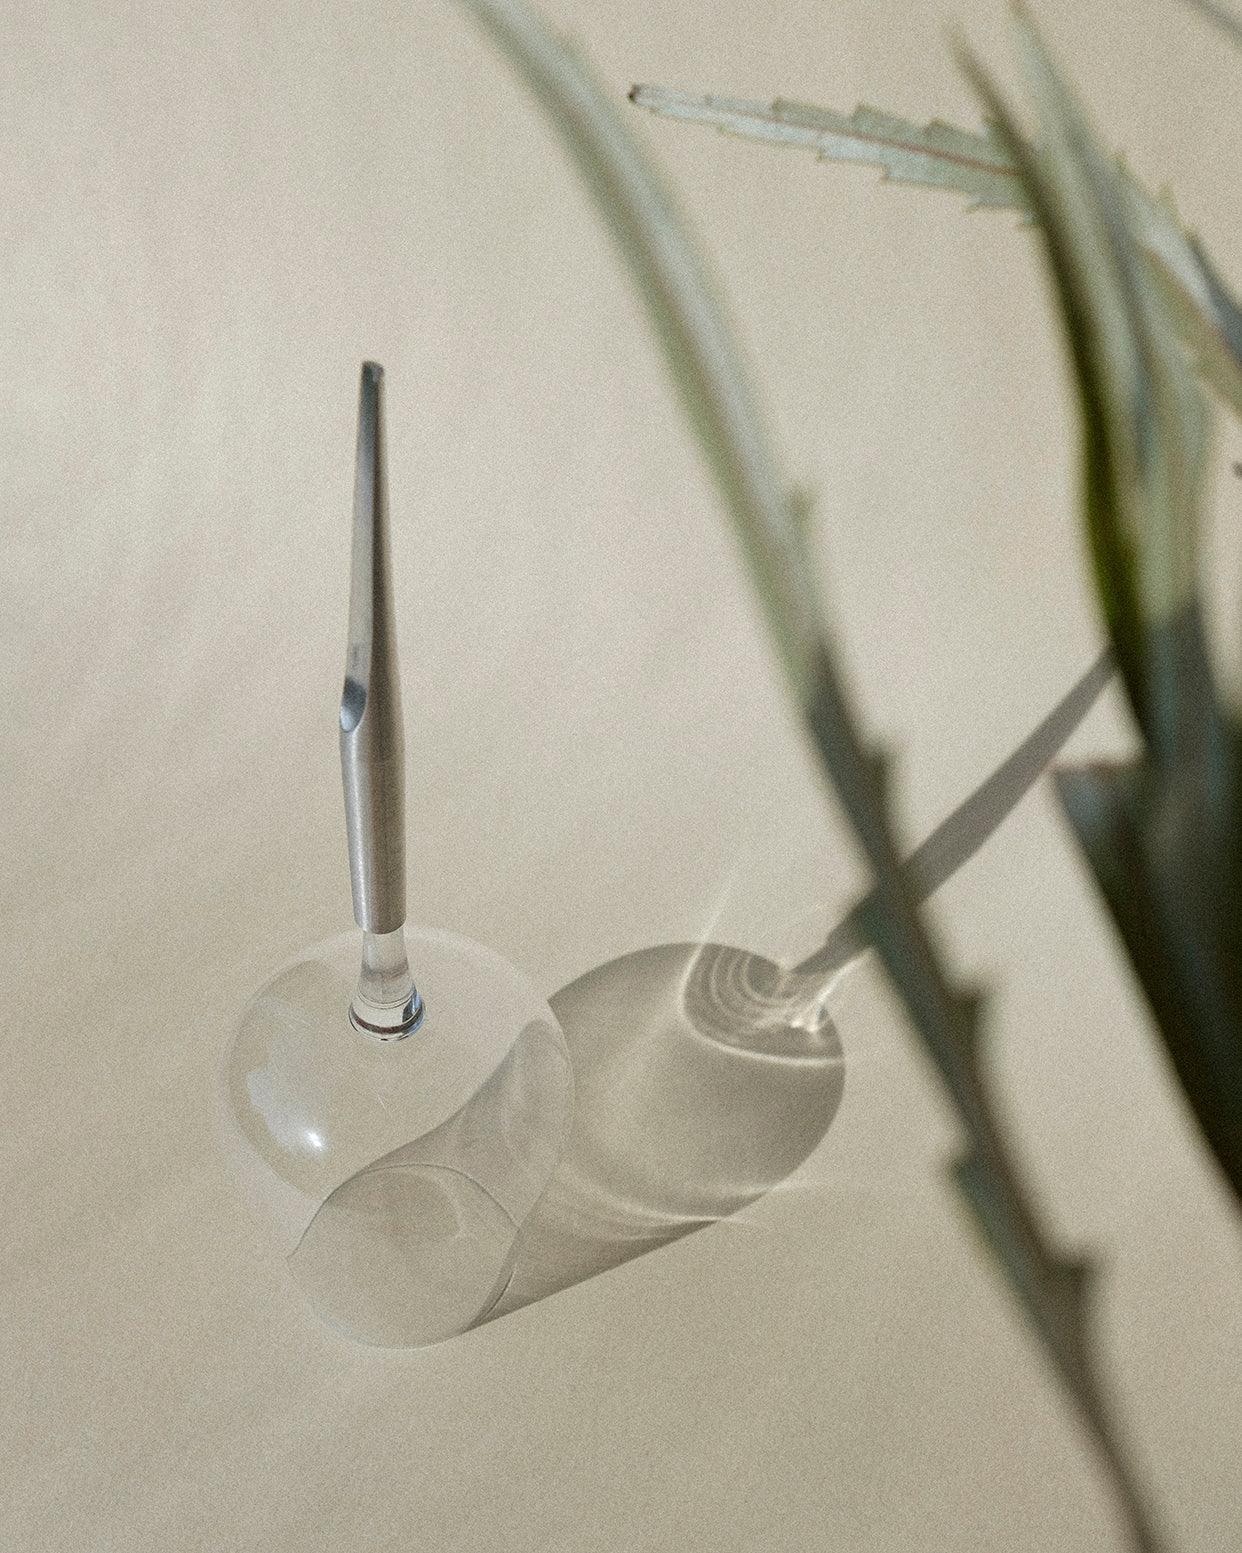 picnic wine glass with metal pin, placed upside down next to plants and shown with shadows